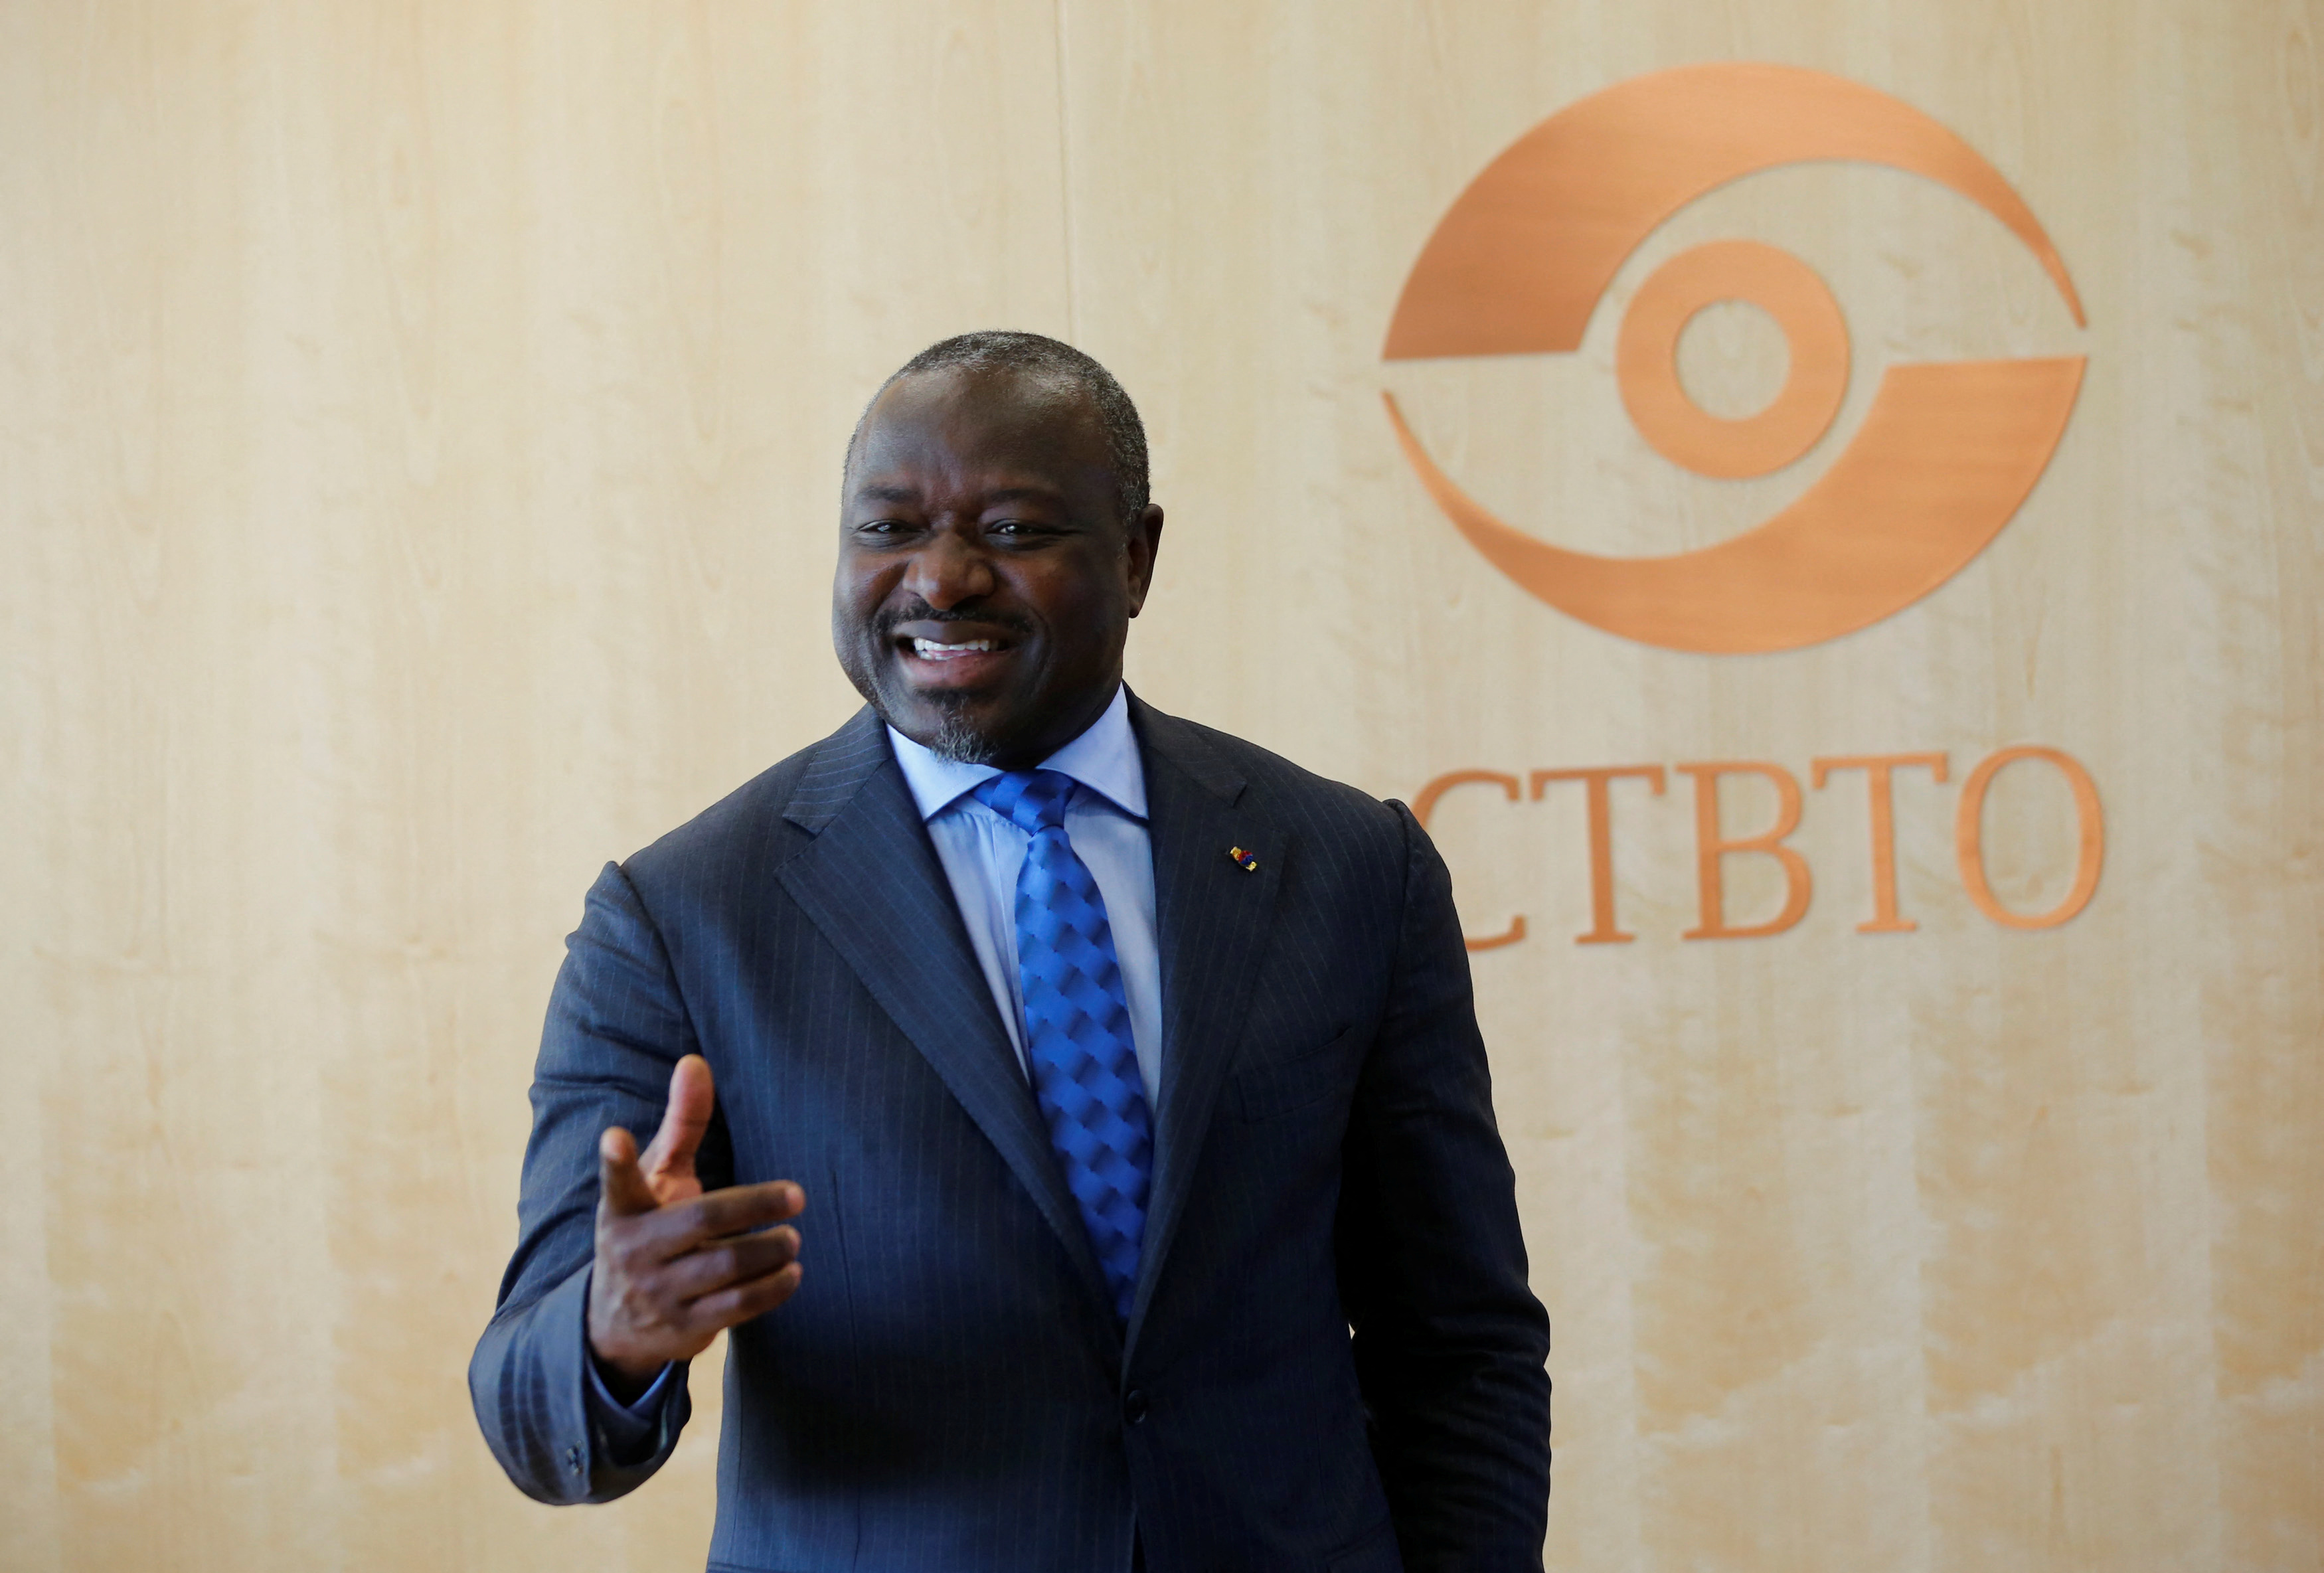 Secretary General of the CTBTO Zerbo gestures during an interview in Vienna